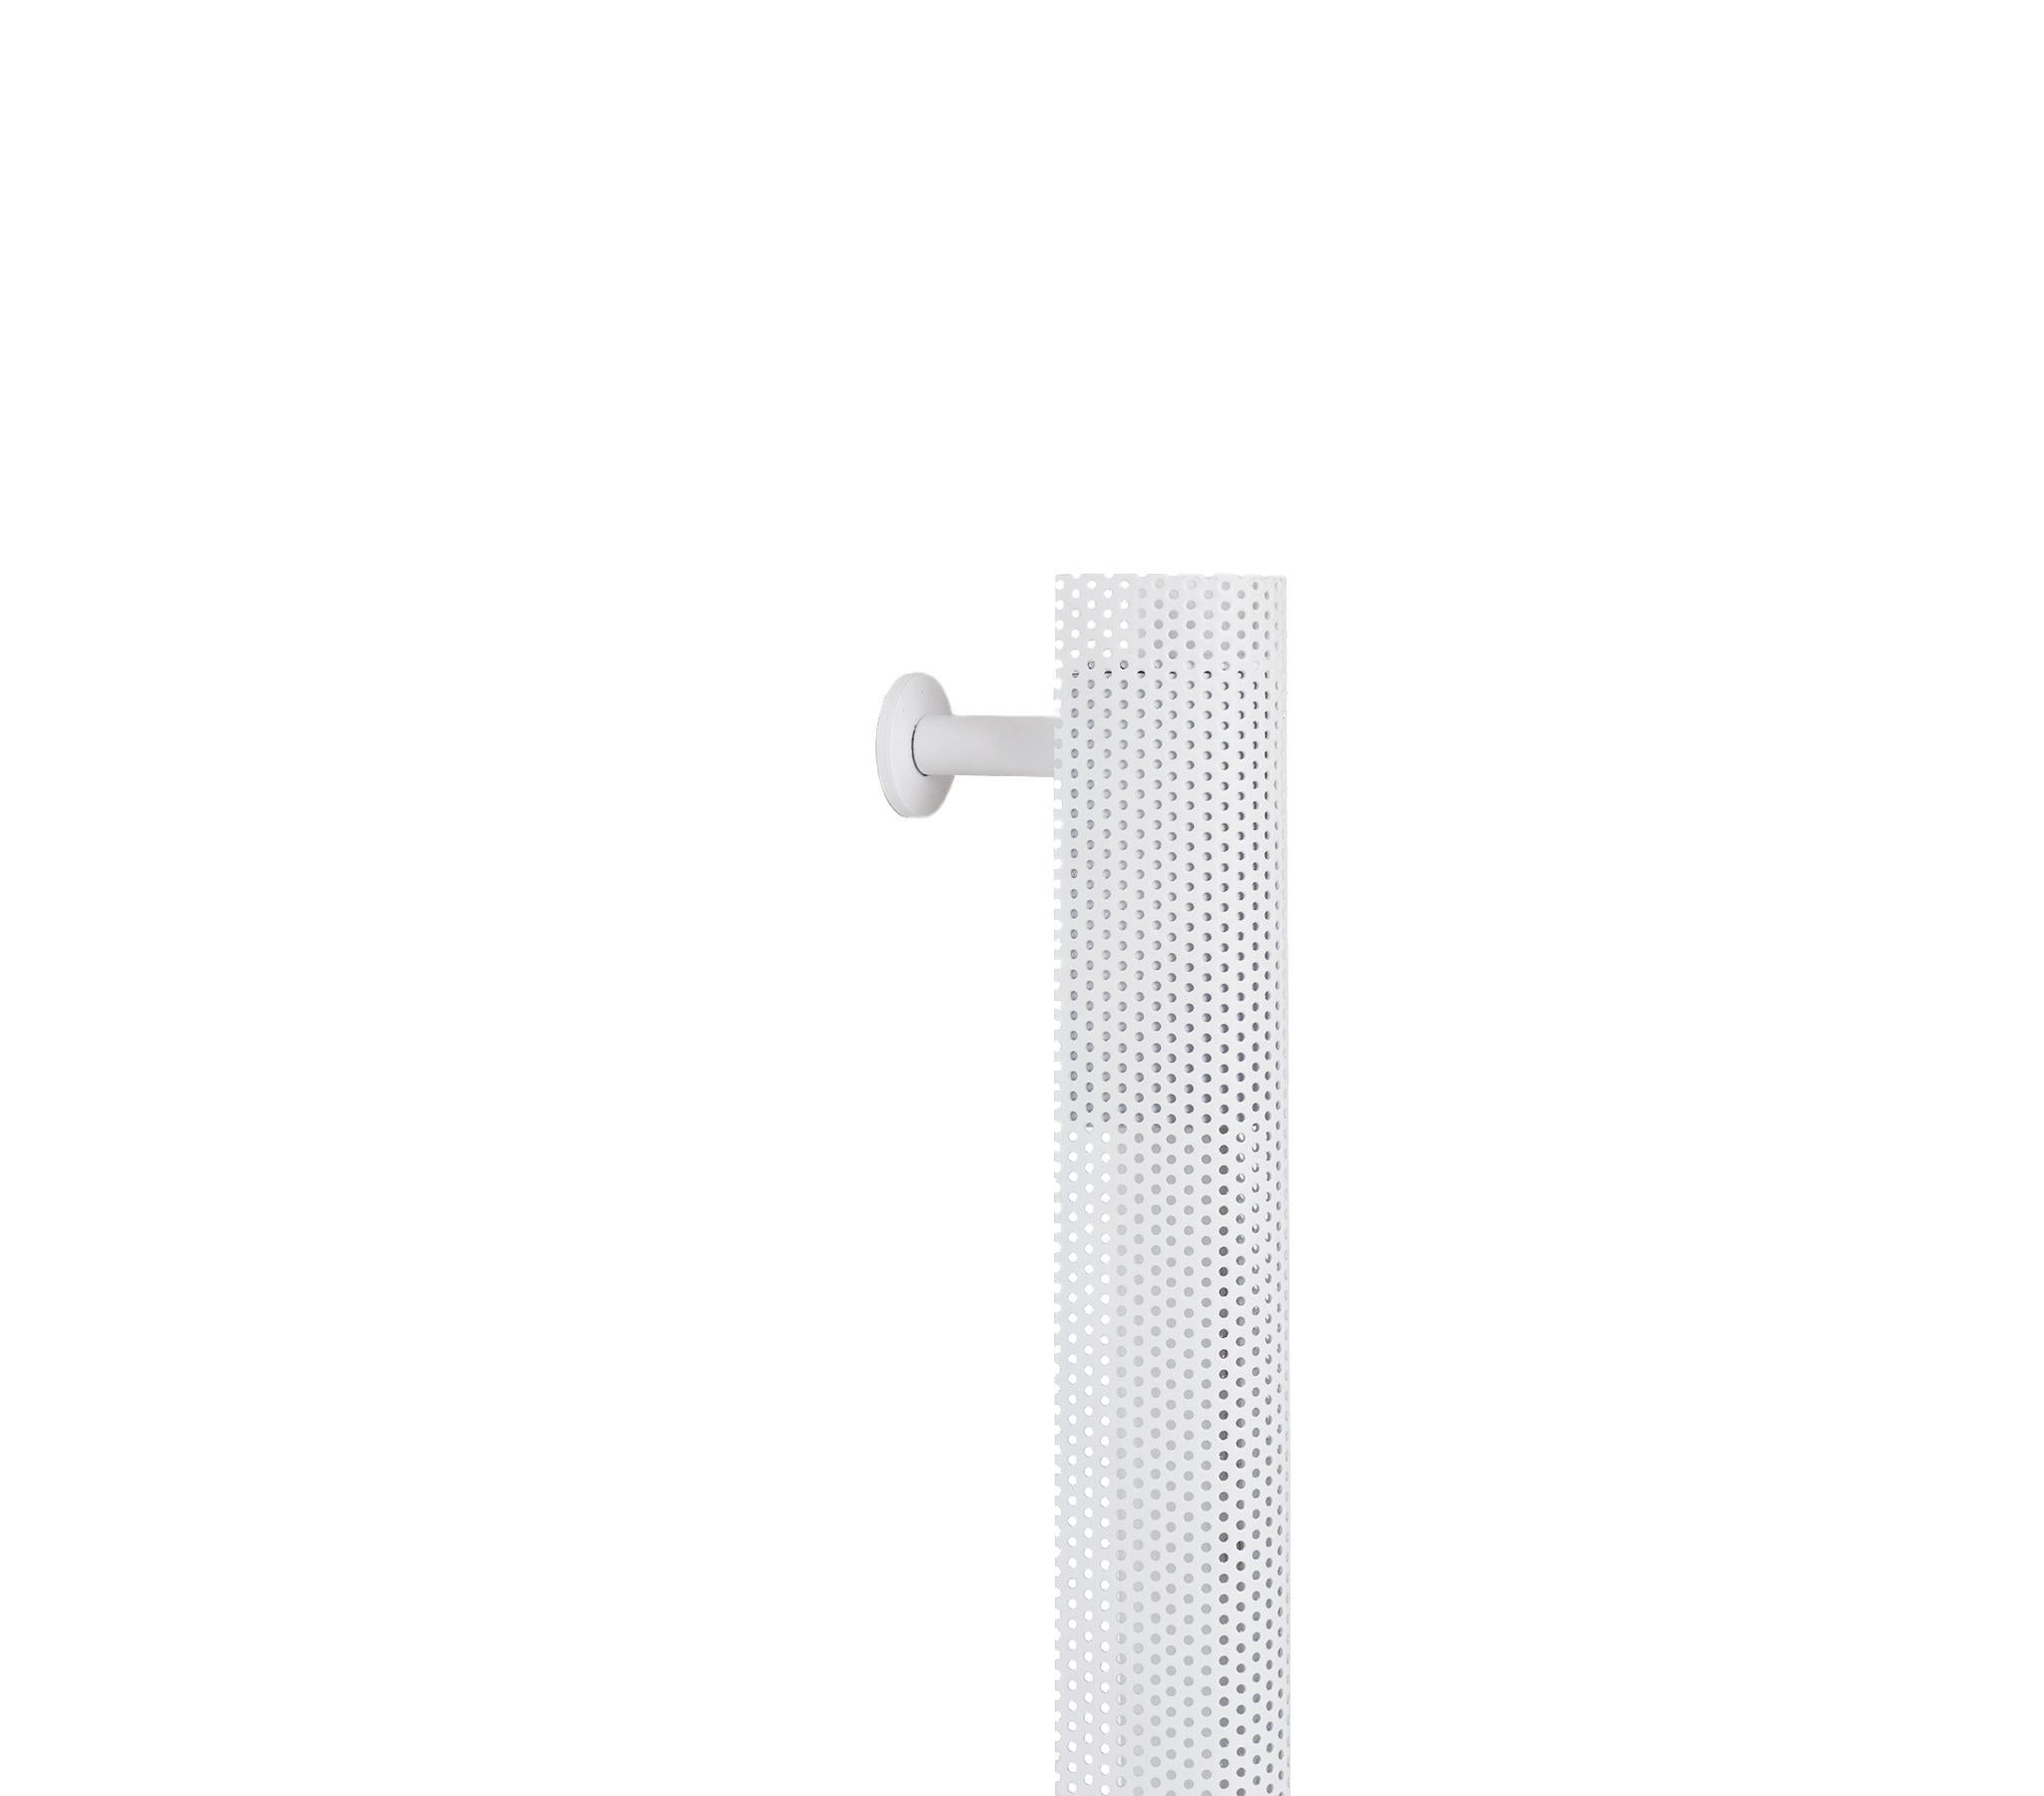 Scandinavian Modern Radent Wall Lamp in White by Nuad For Sale